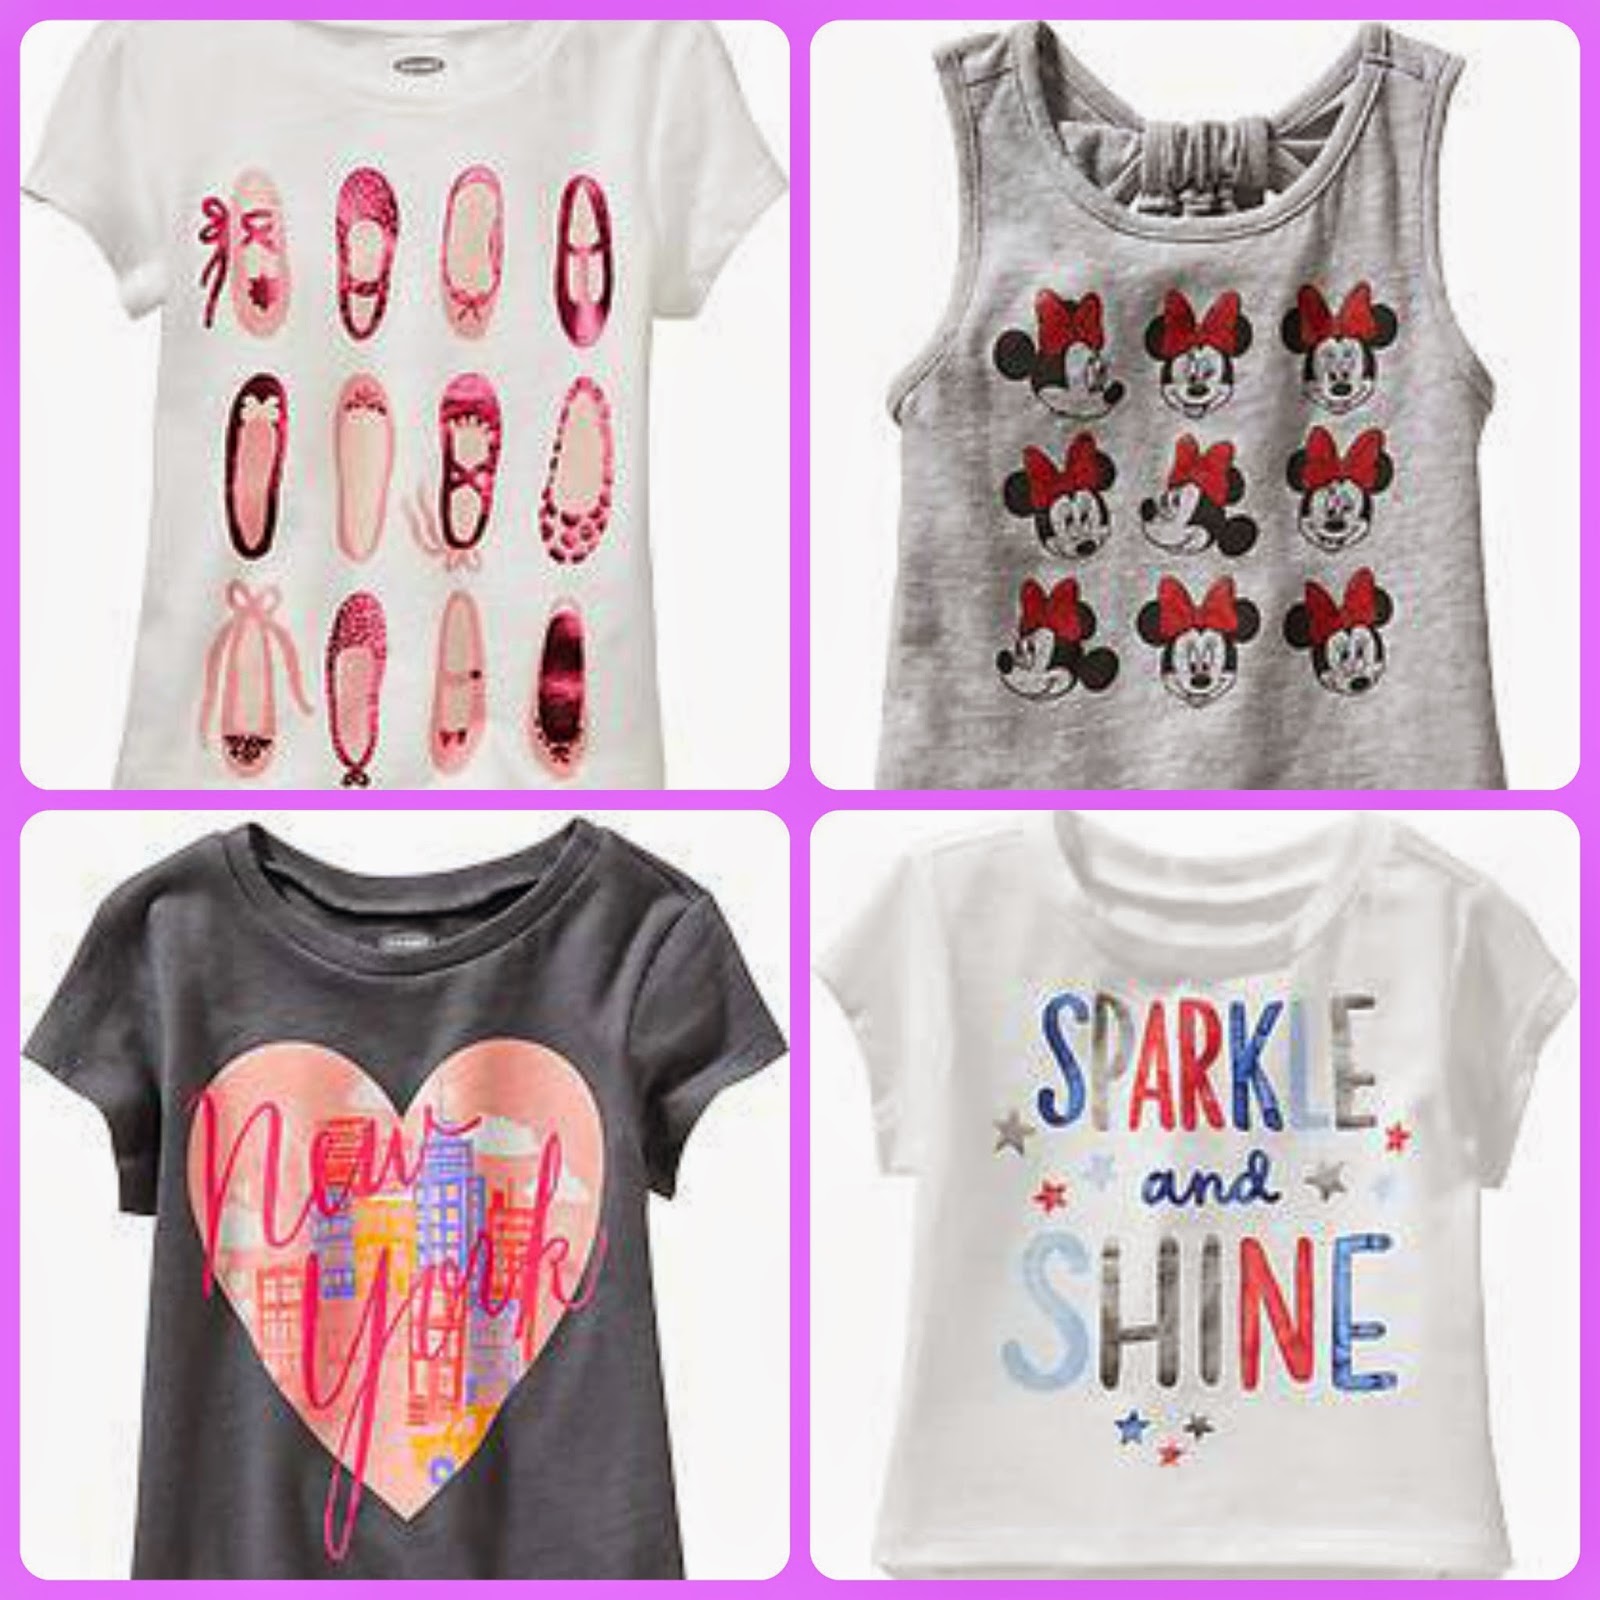 Old Navy Bargains - 6 Reasons I Love Their Children's Clothing